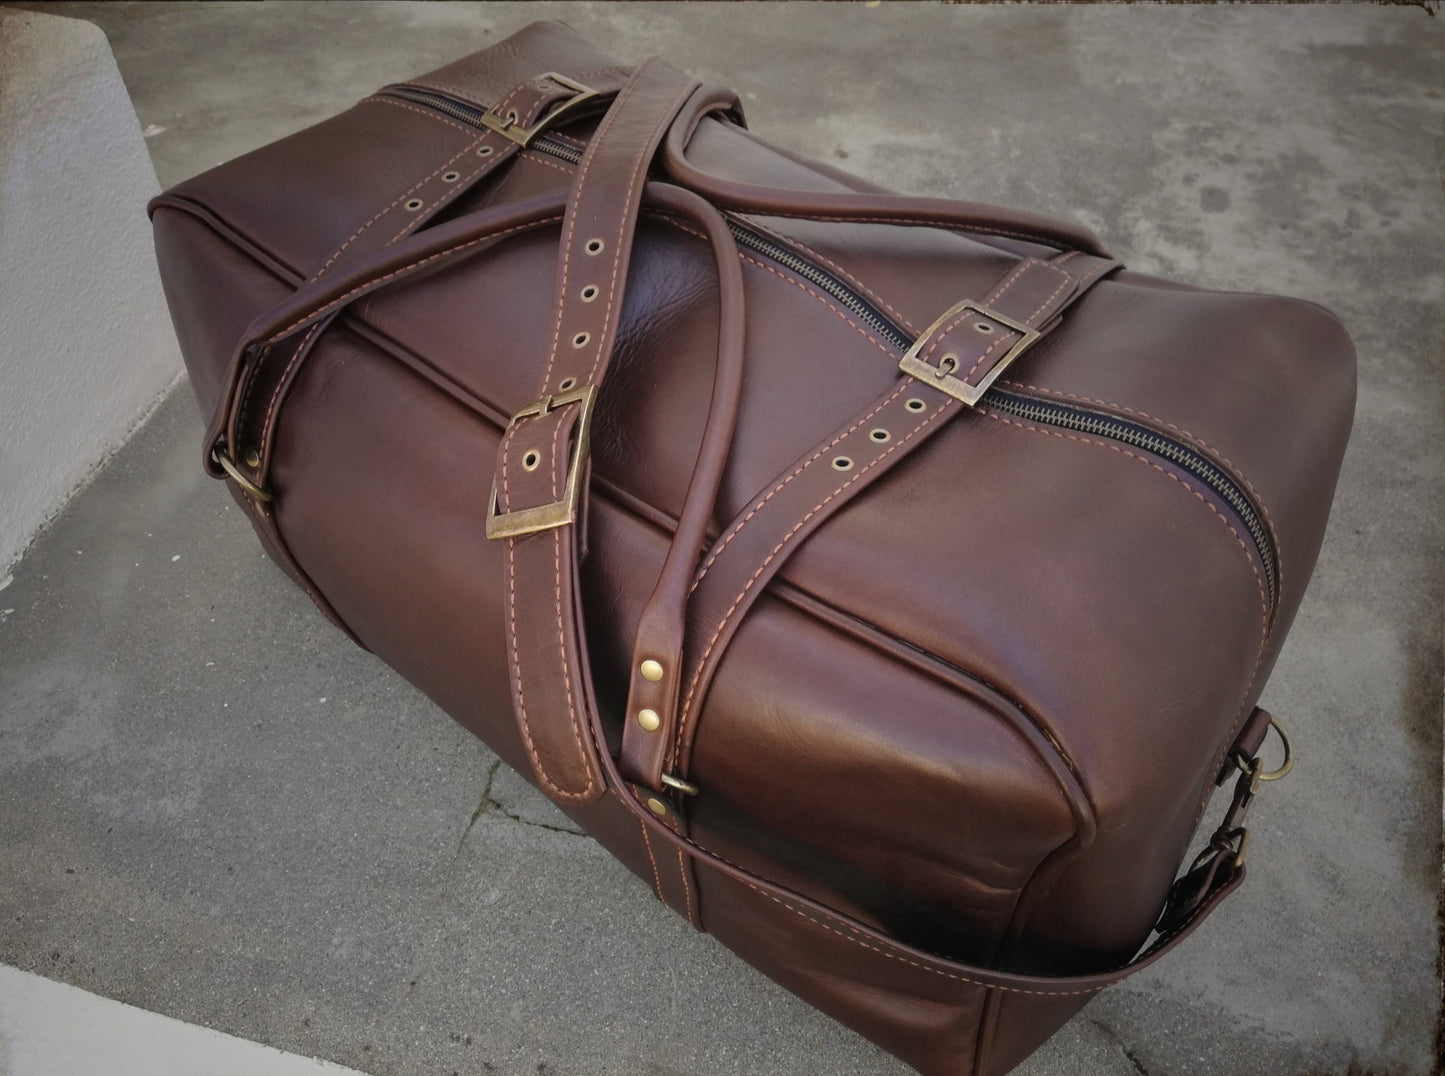 The William Hand Luggage Bag